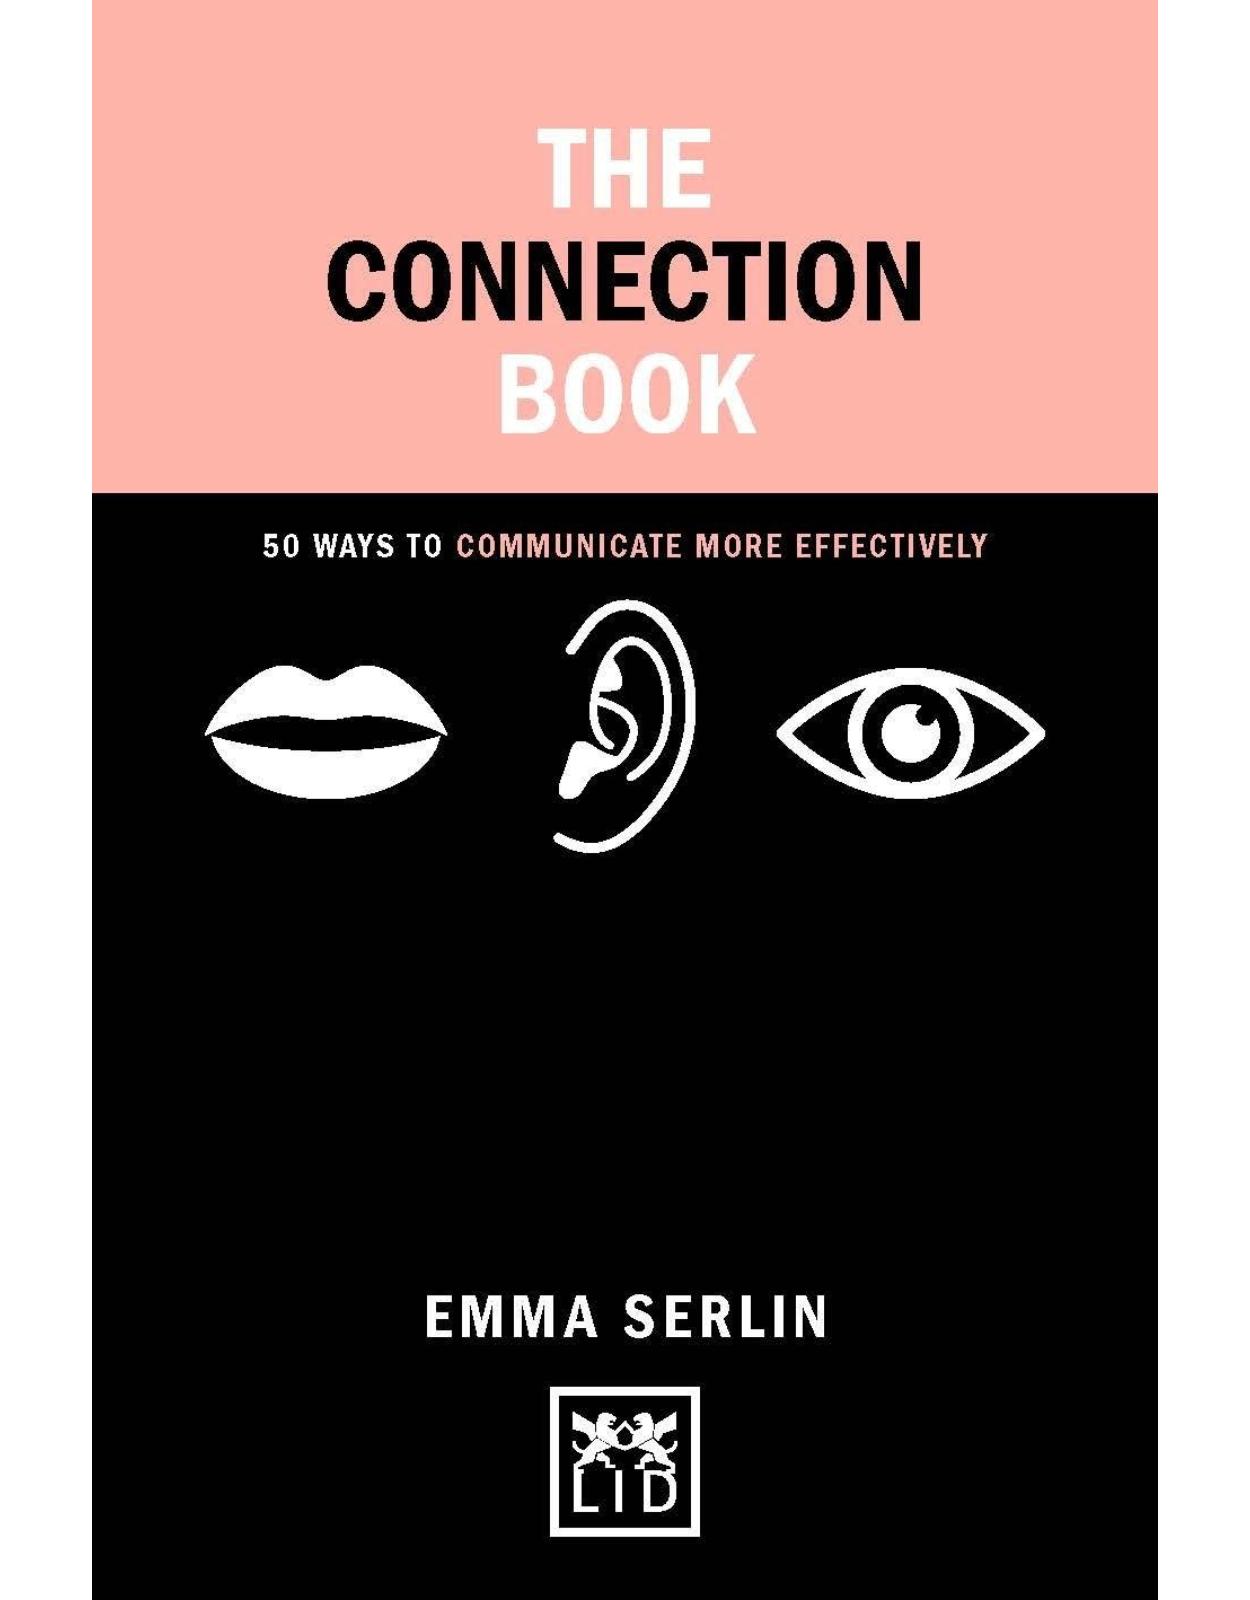 The Connection Book: 50 Ways to Communicate More Effectively